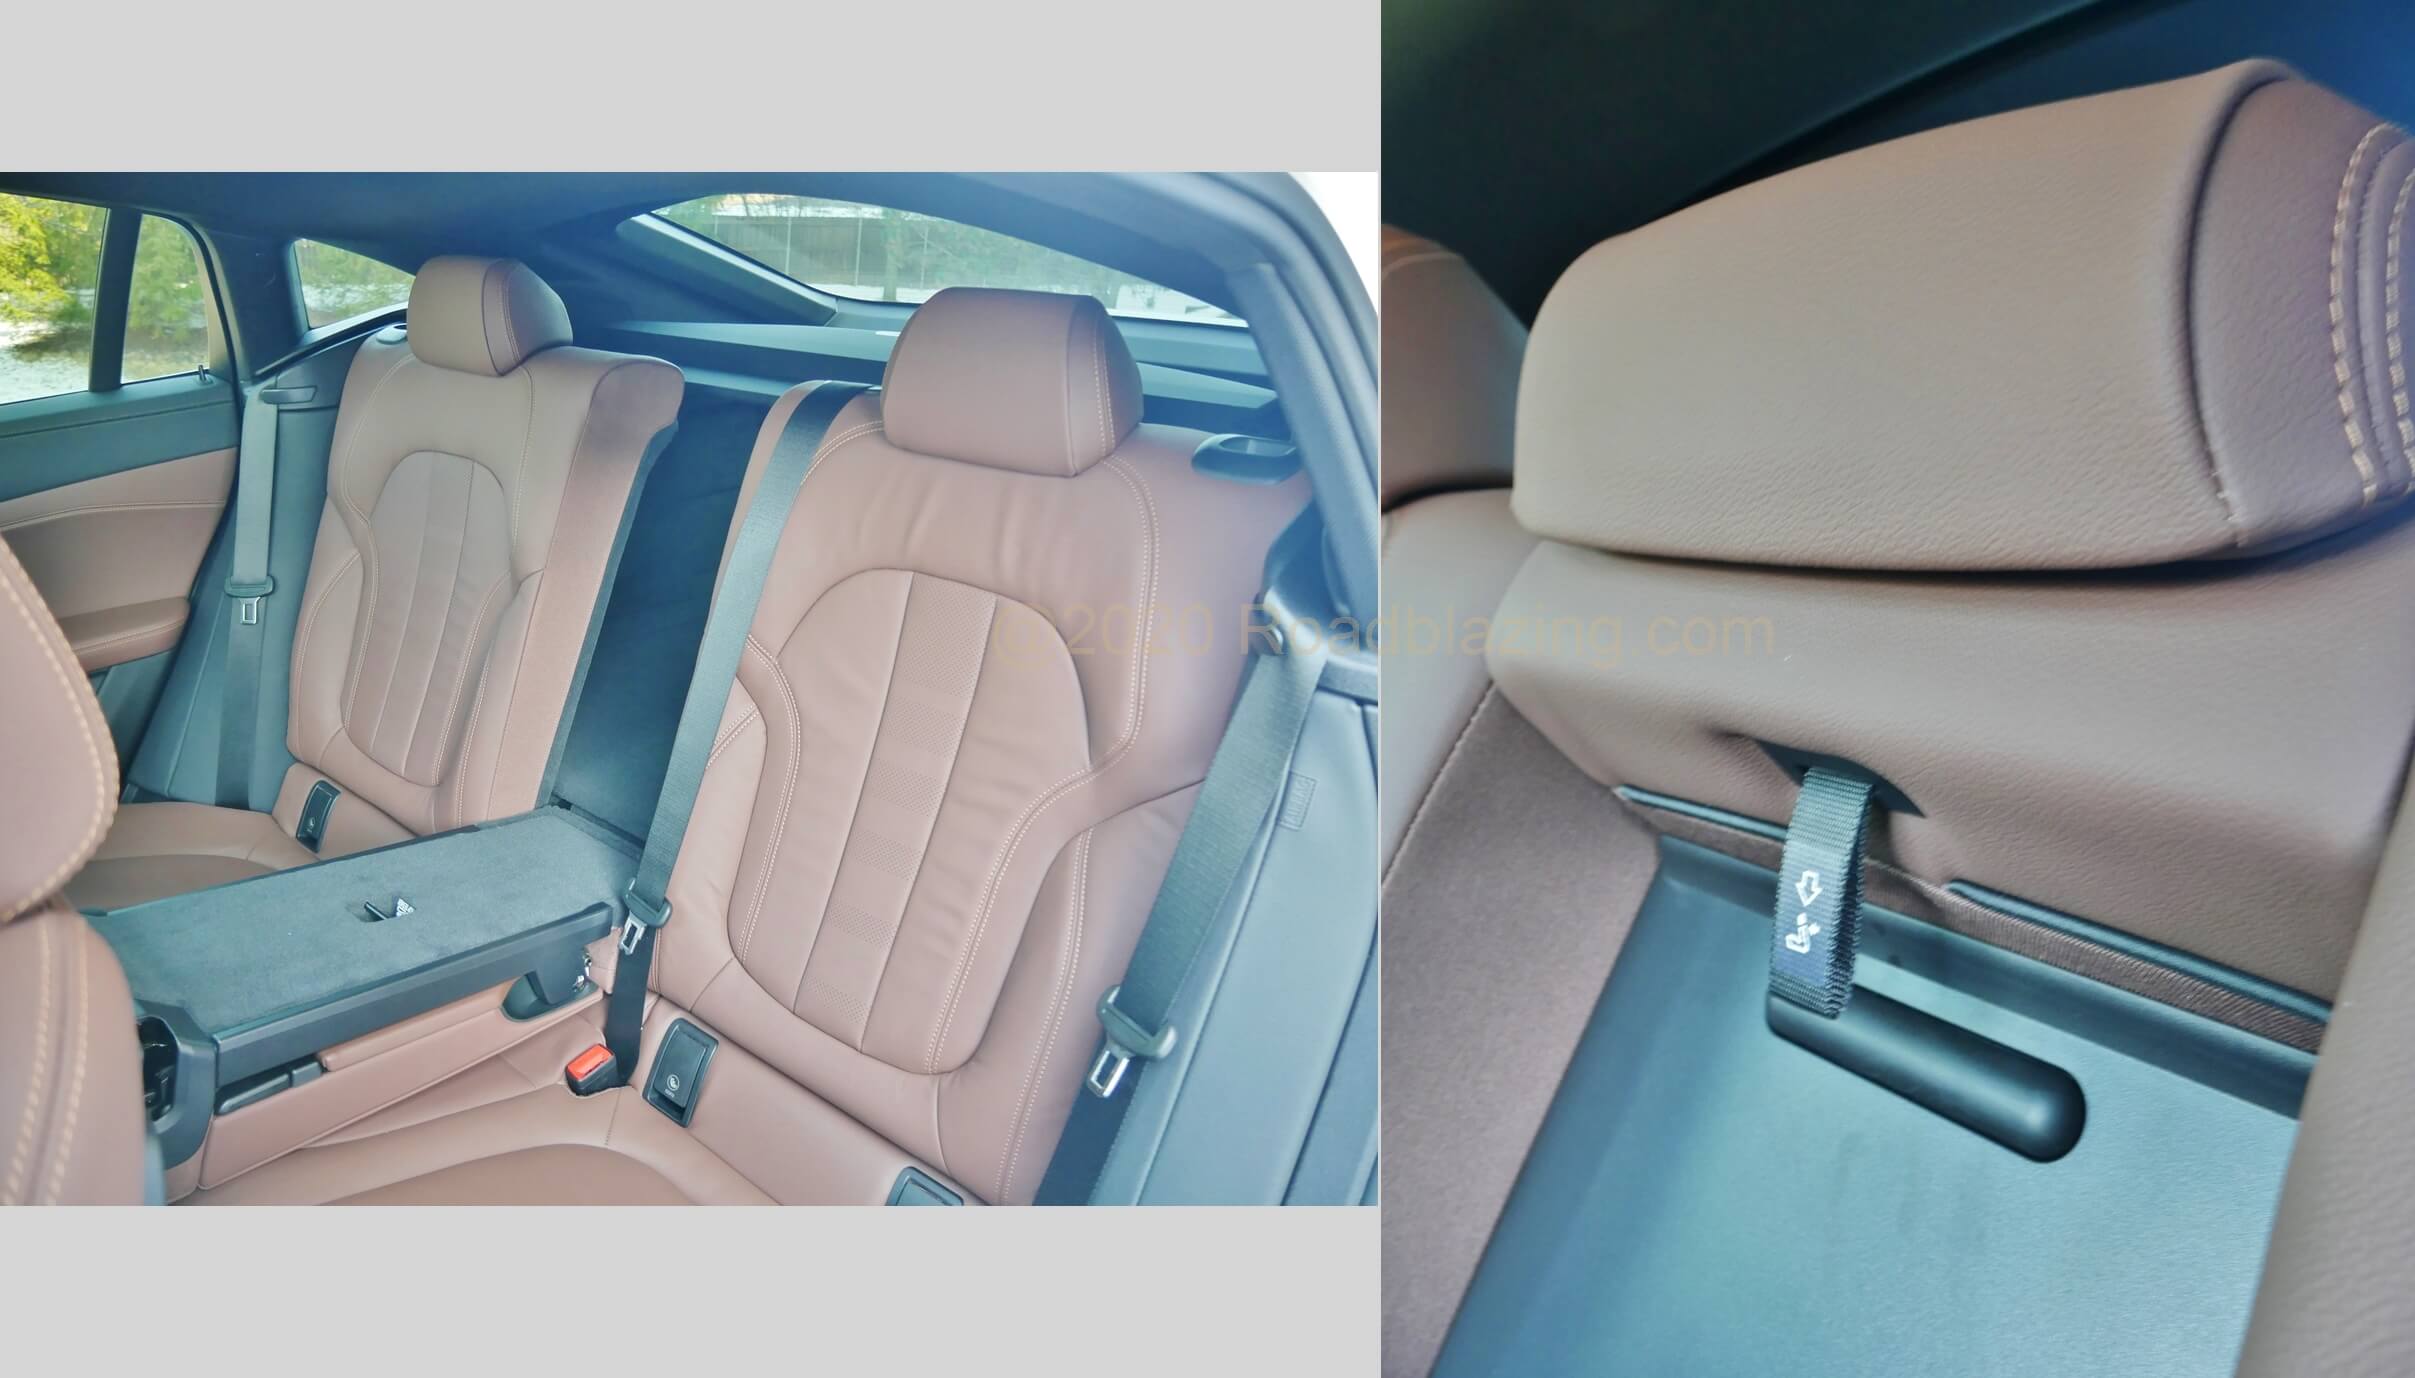 2020 BMW X6 xDrive 40i: folding 2nd Row mid seat back requires fumbling with strap beneath armrest.